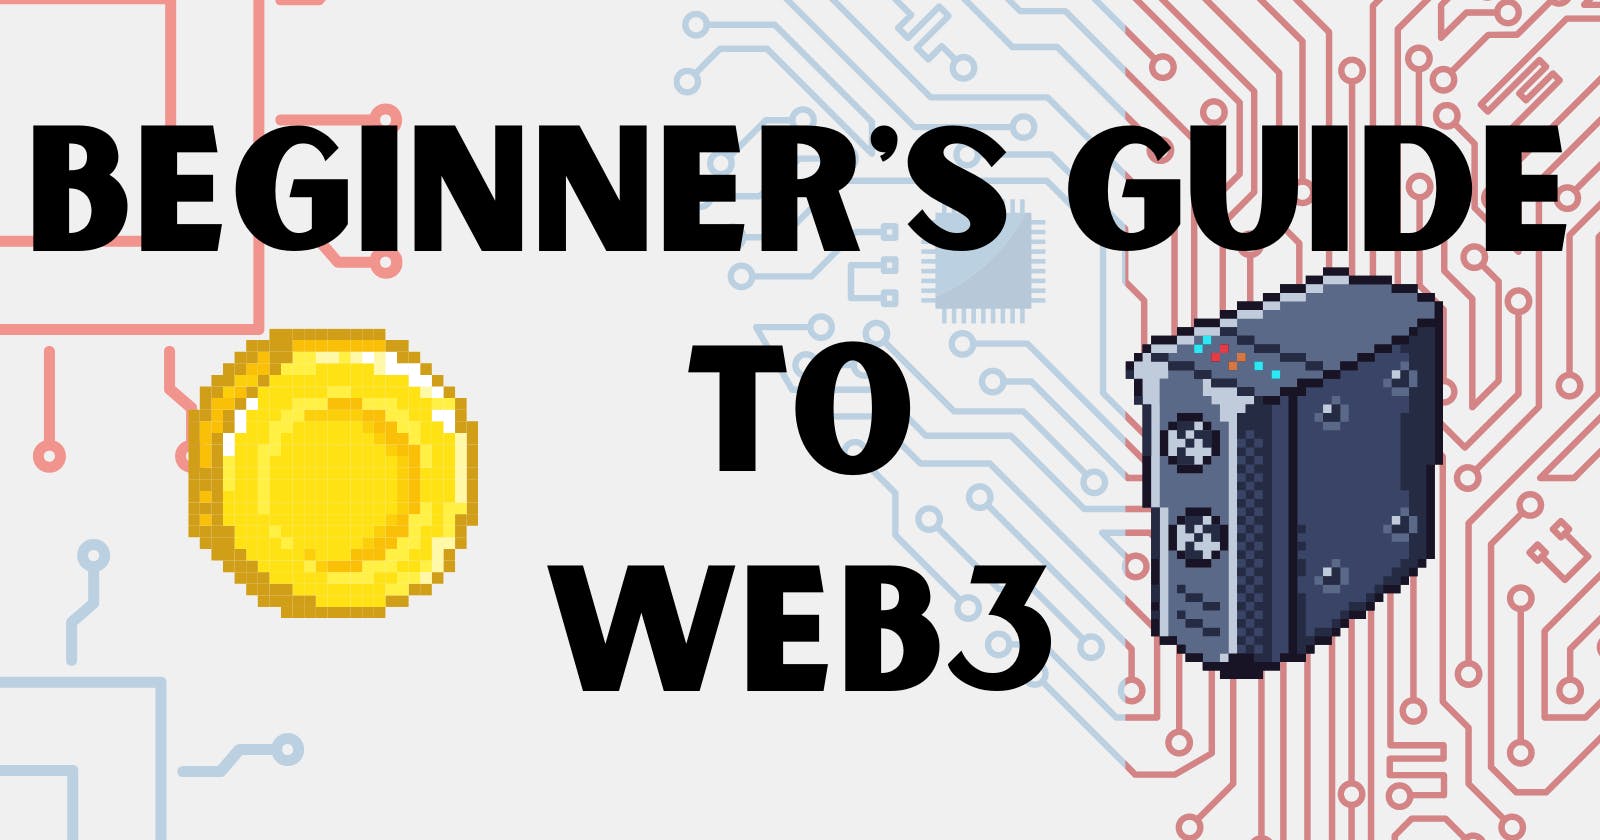 Beginner's Guide To Web3